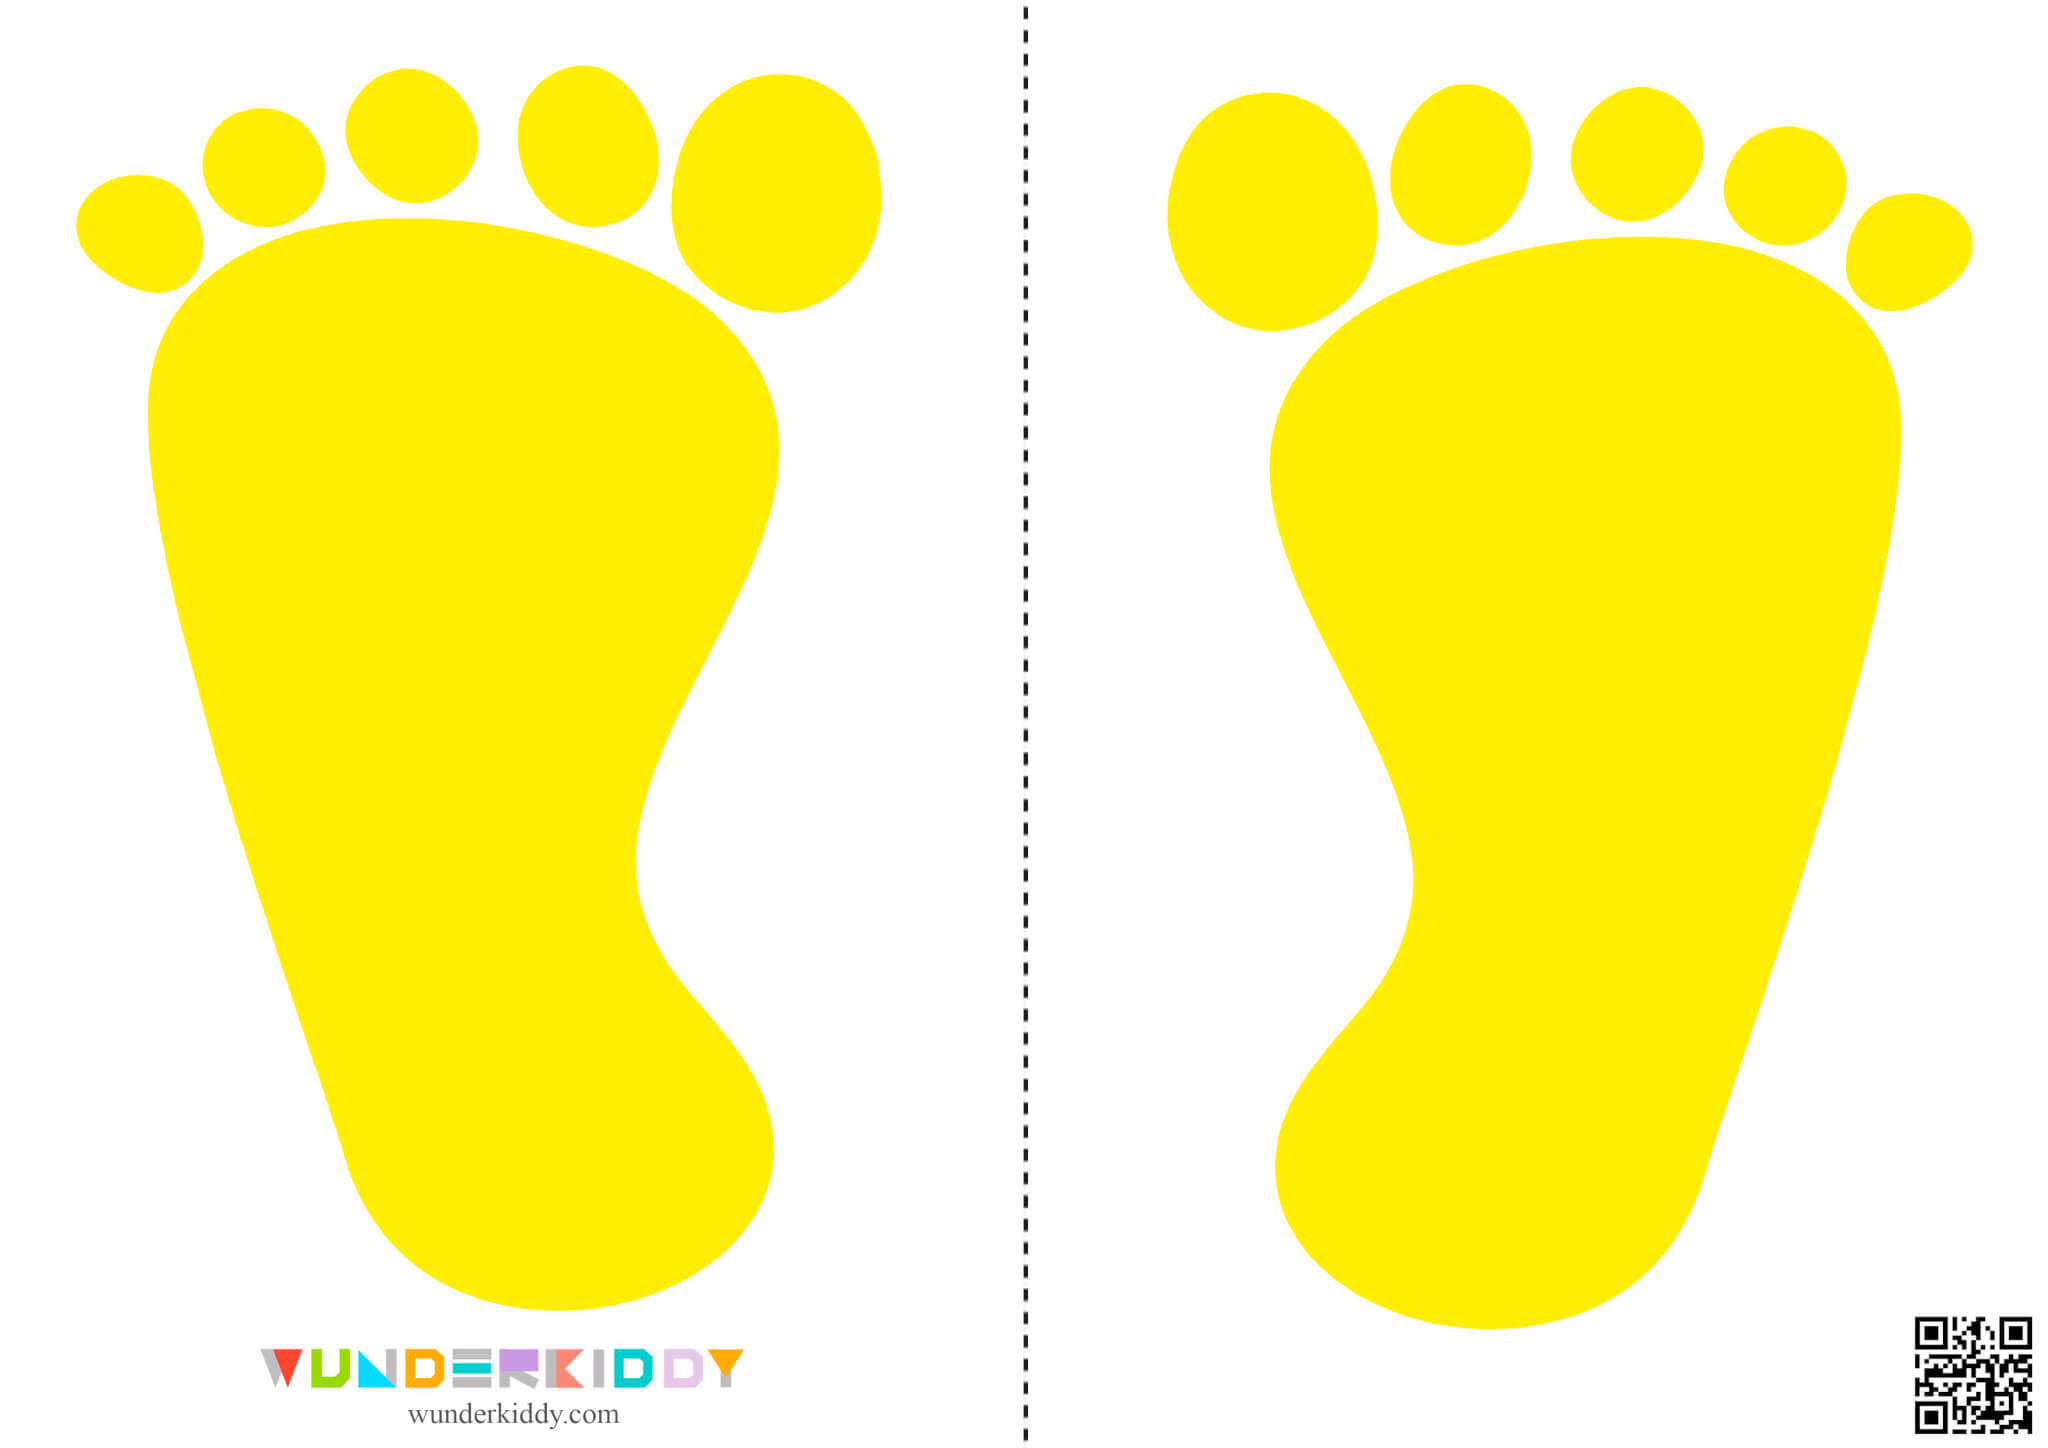 Hands and Feet Color Sensory Path - Image 18